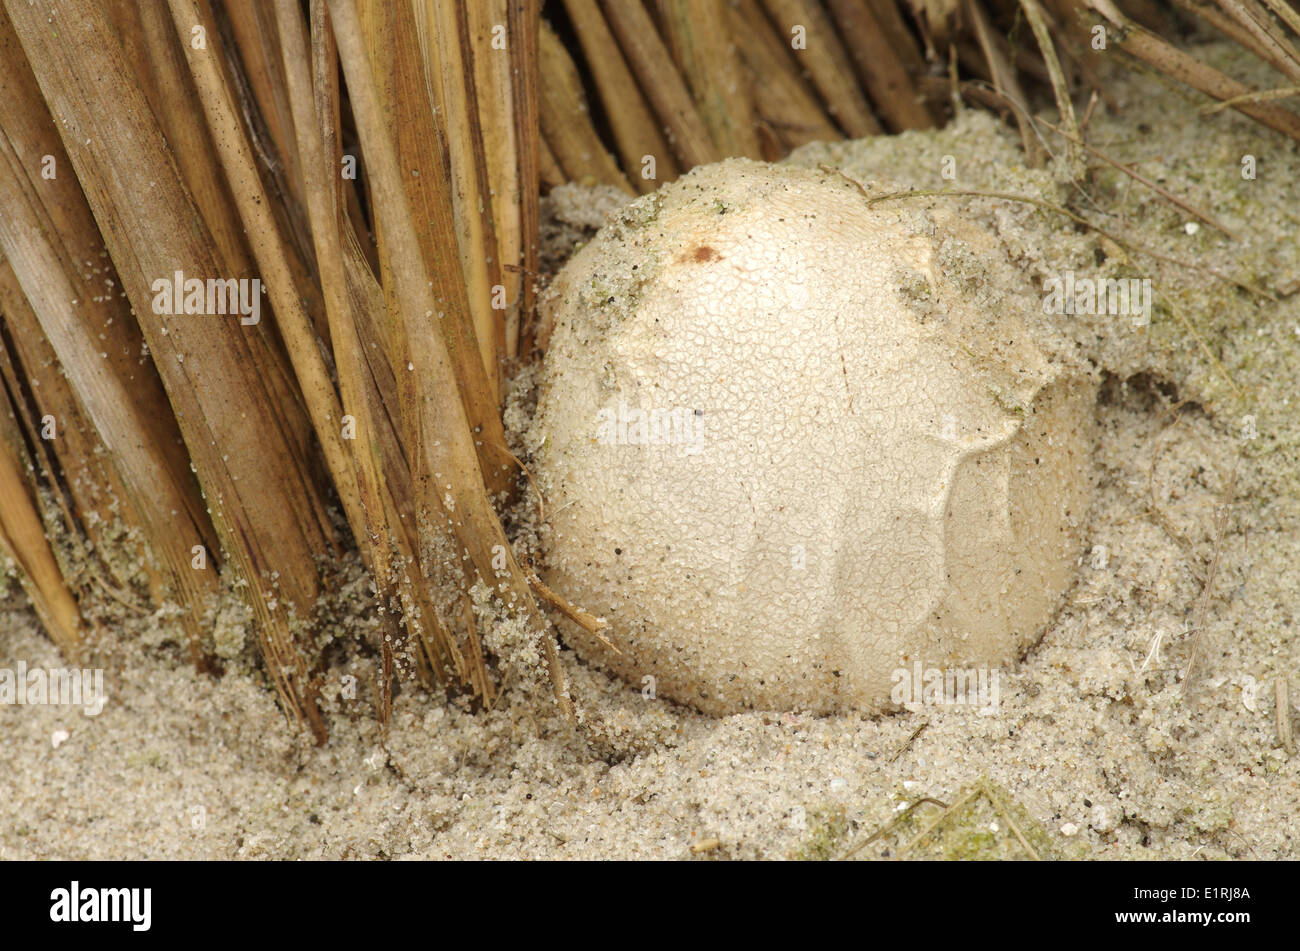 The egg-like stage of the Dune stinkhorn Stock Photo